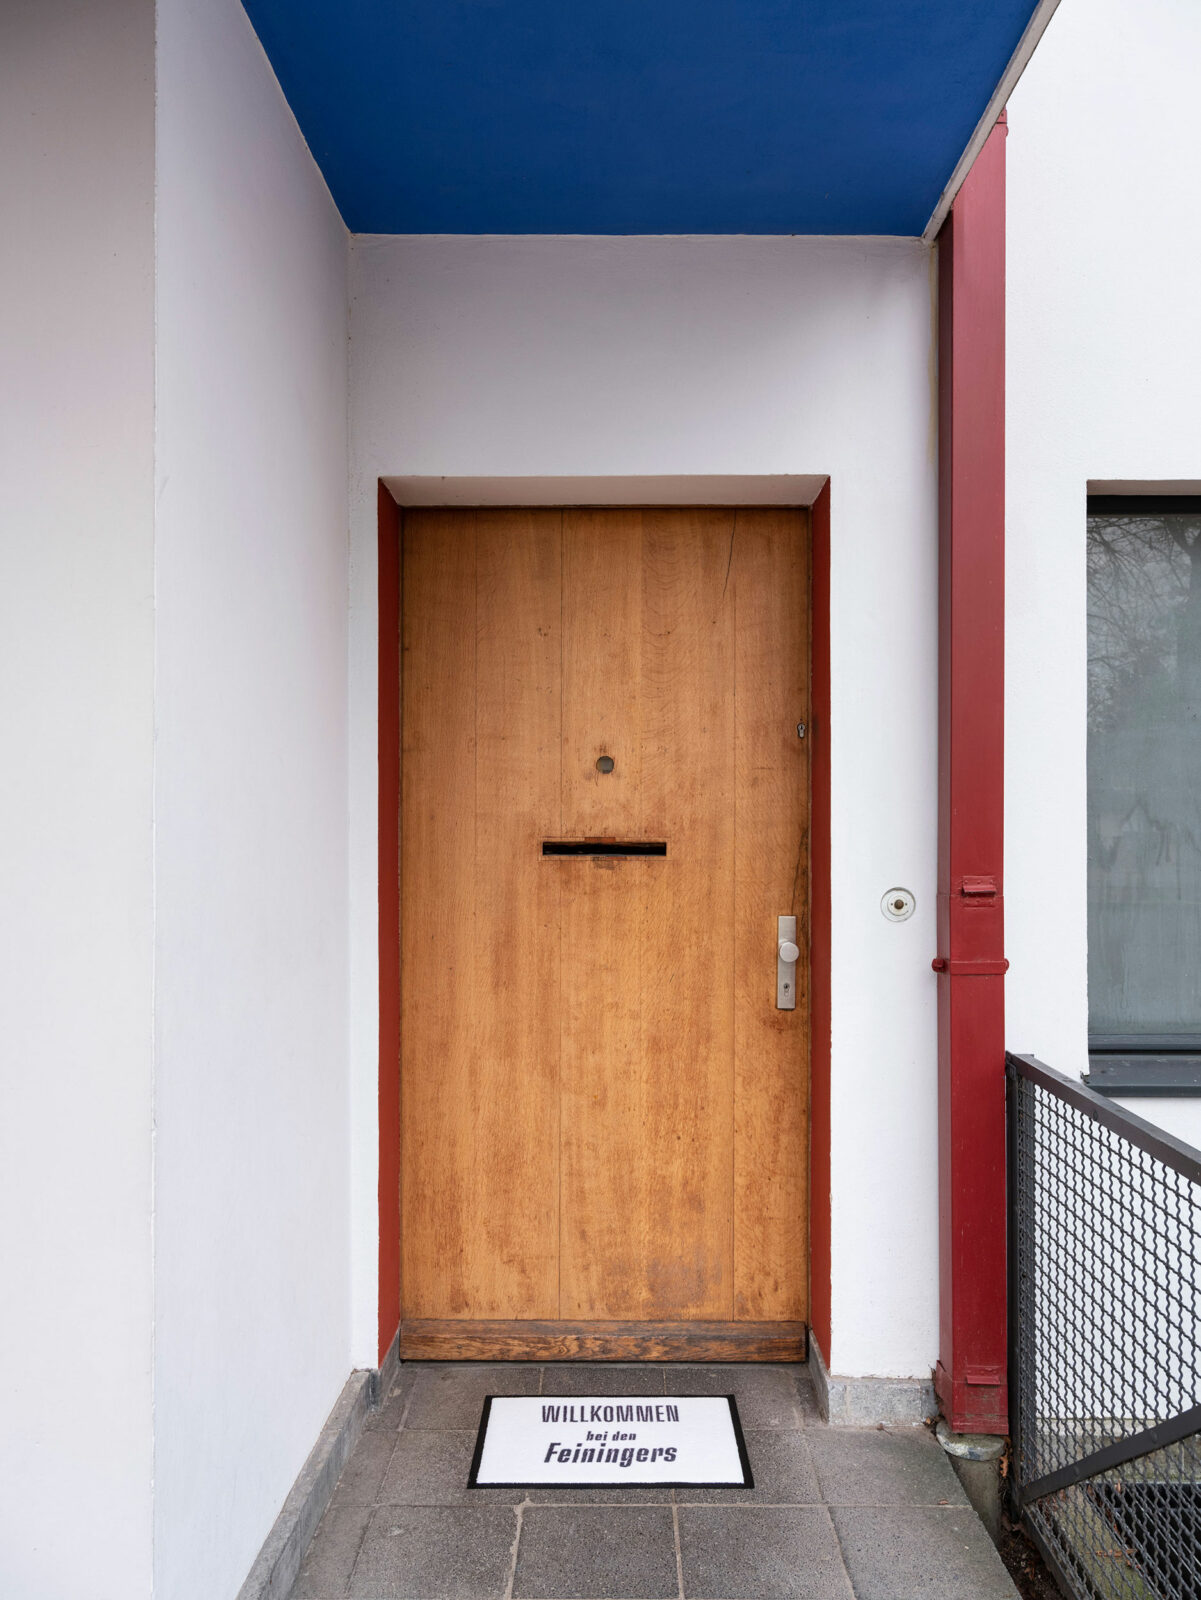 Wooden entrance door with red frame. The ceiling of the cantilevered upper floor is painted blue. In front of the door is a doormat with the inscription 